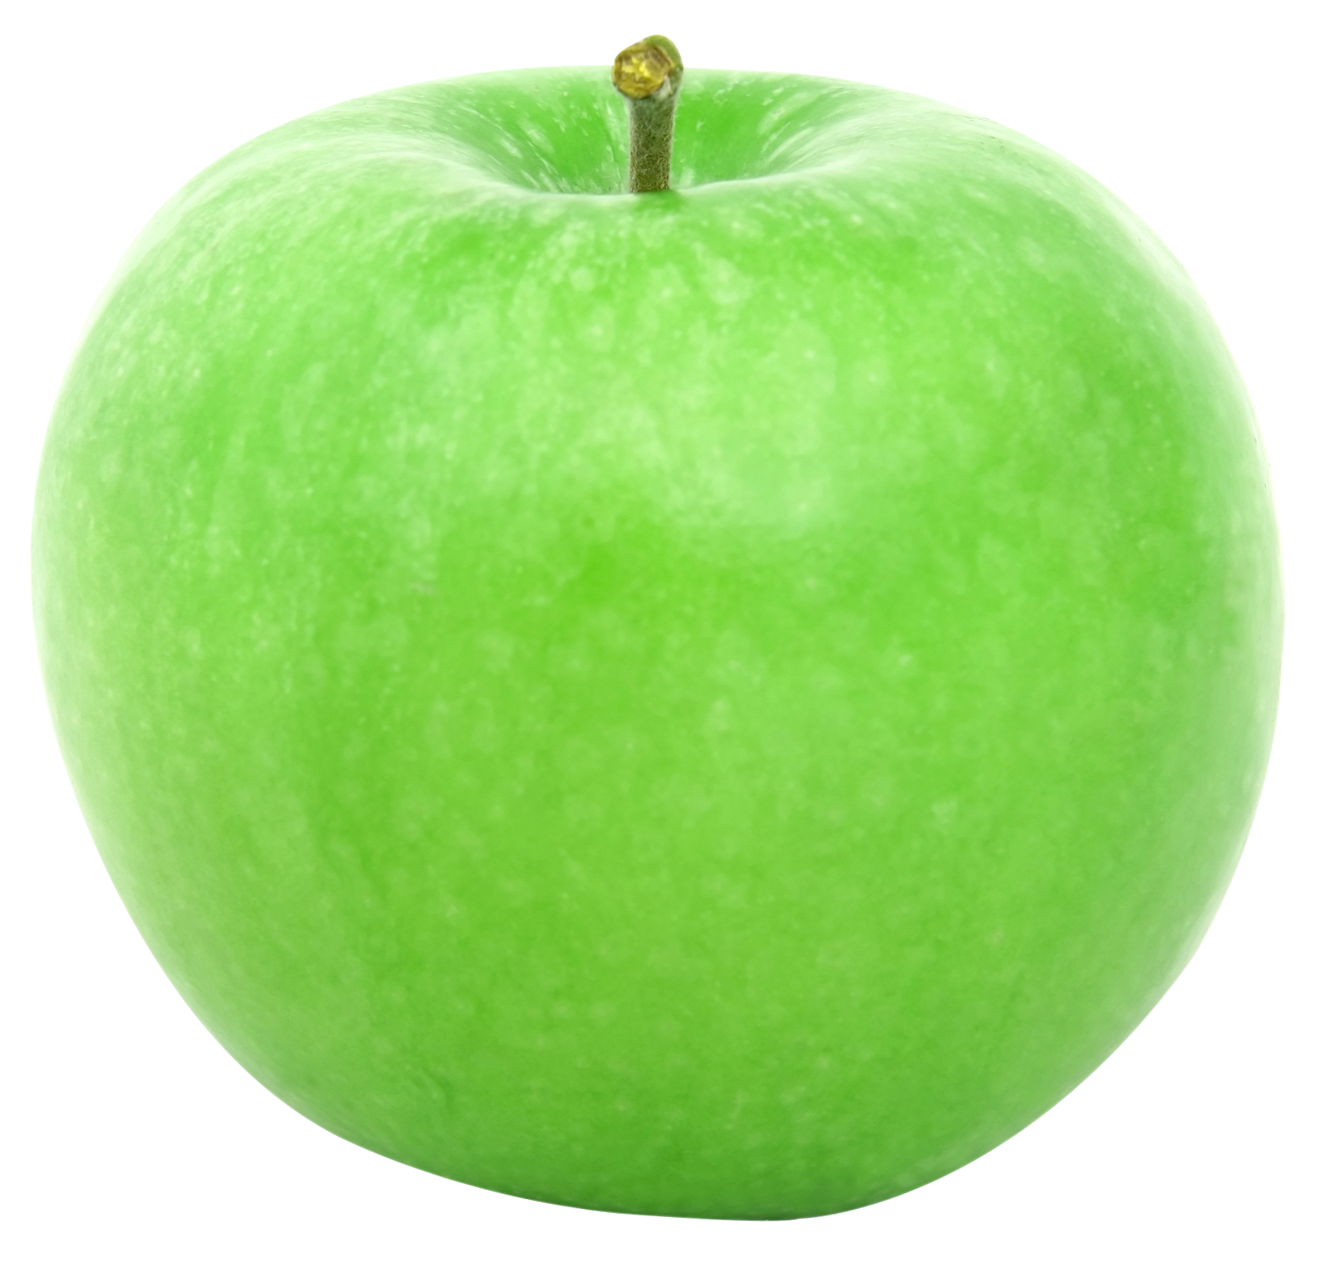 Green apple PNG